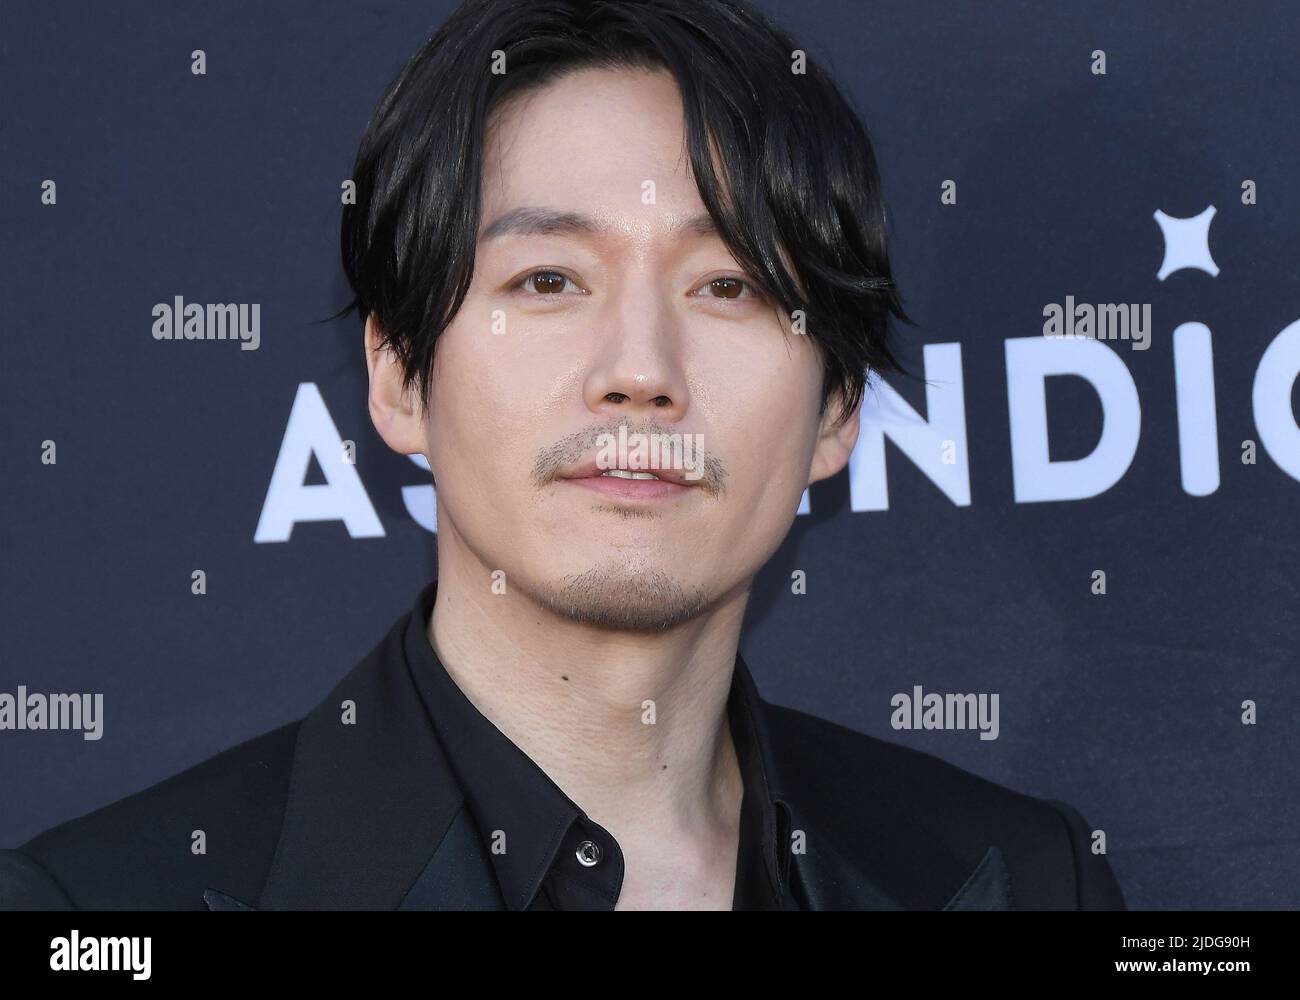 Los Angeles, USA. 20th June, 2022. South Korean actor/rapper Jang Hyuk arrives at THE KILLER Los Angeles Premiere held at the Regency Village Theater in Westwood, CA on Monday, ?June 20, 2022. (Photo By Sthanlee B. Mirador/Sipa USA) Credit: Sipa USA/Alamy Live News Stock Photo